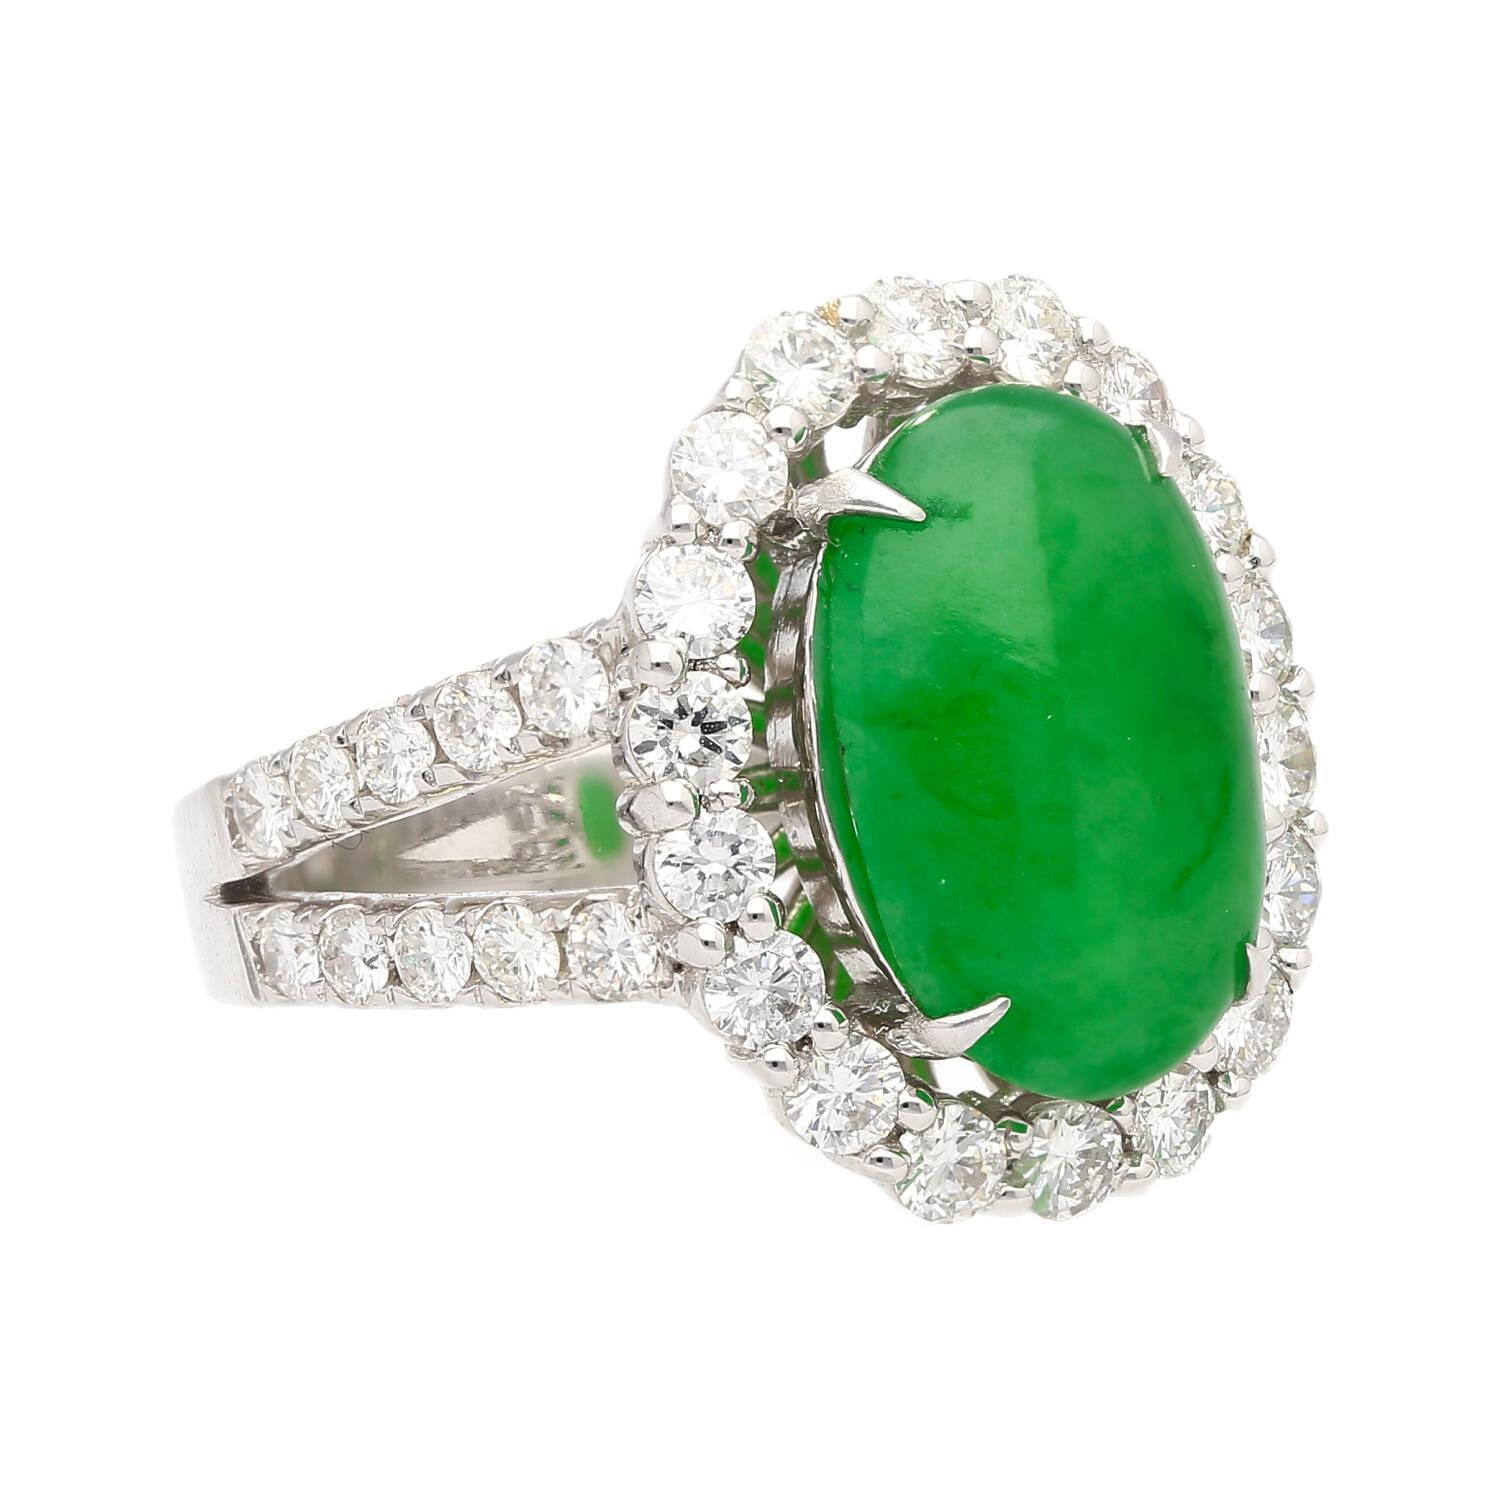 HK Lab Certified 5.329 Carat Jade and Diamond Halo Ring in 18K White Gold For Sale 4